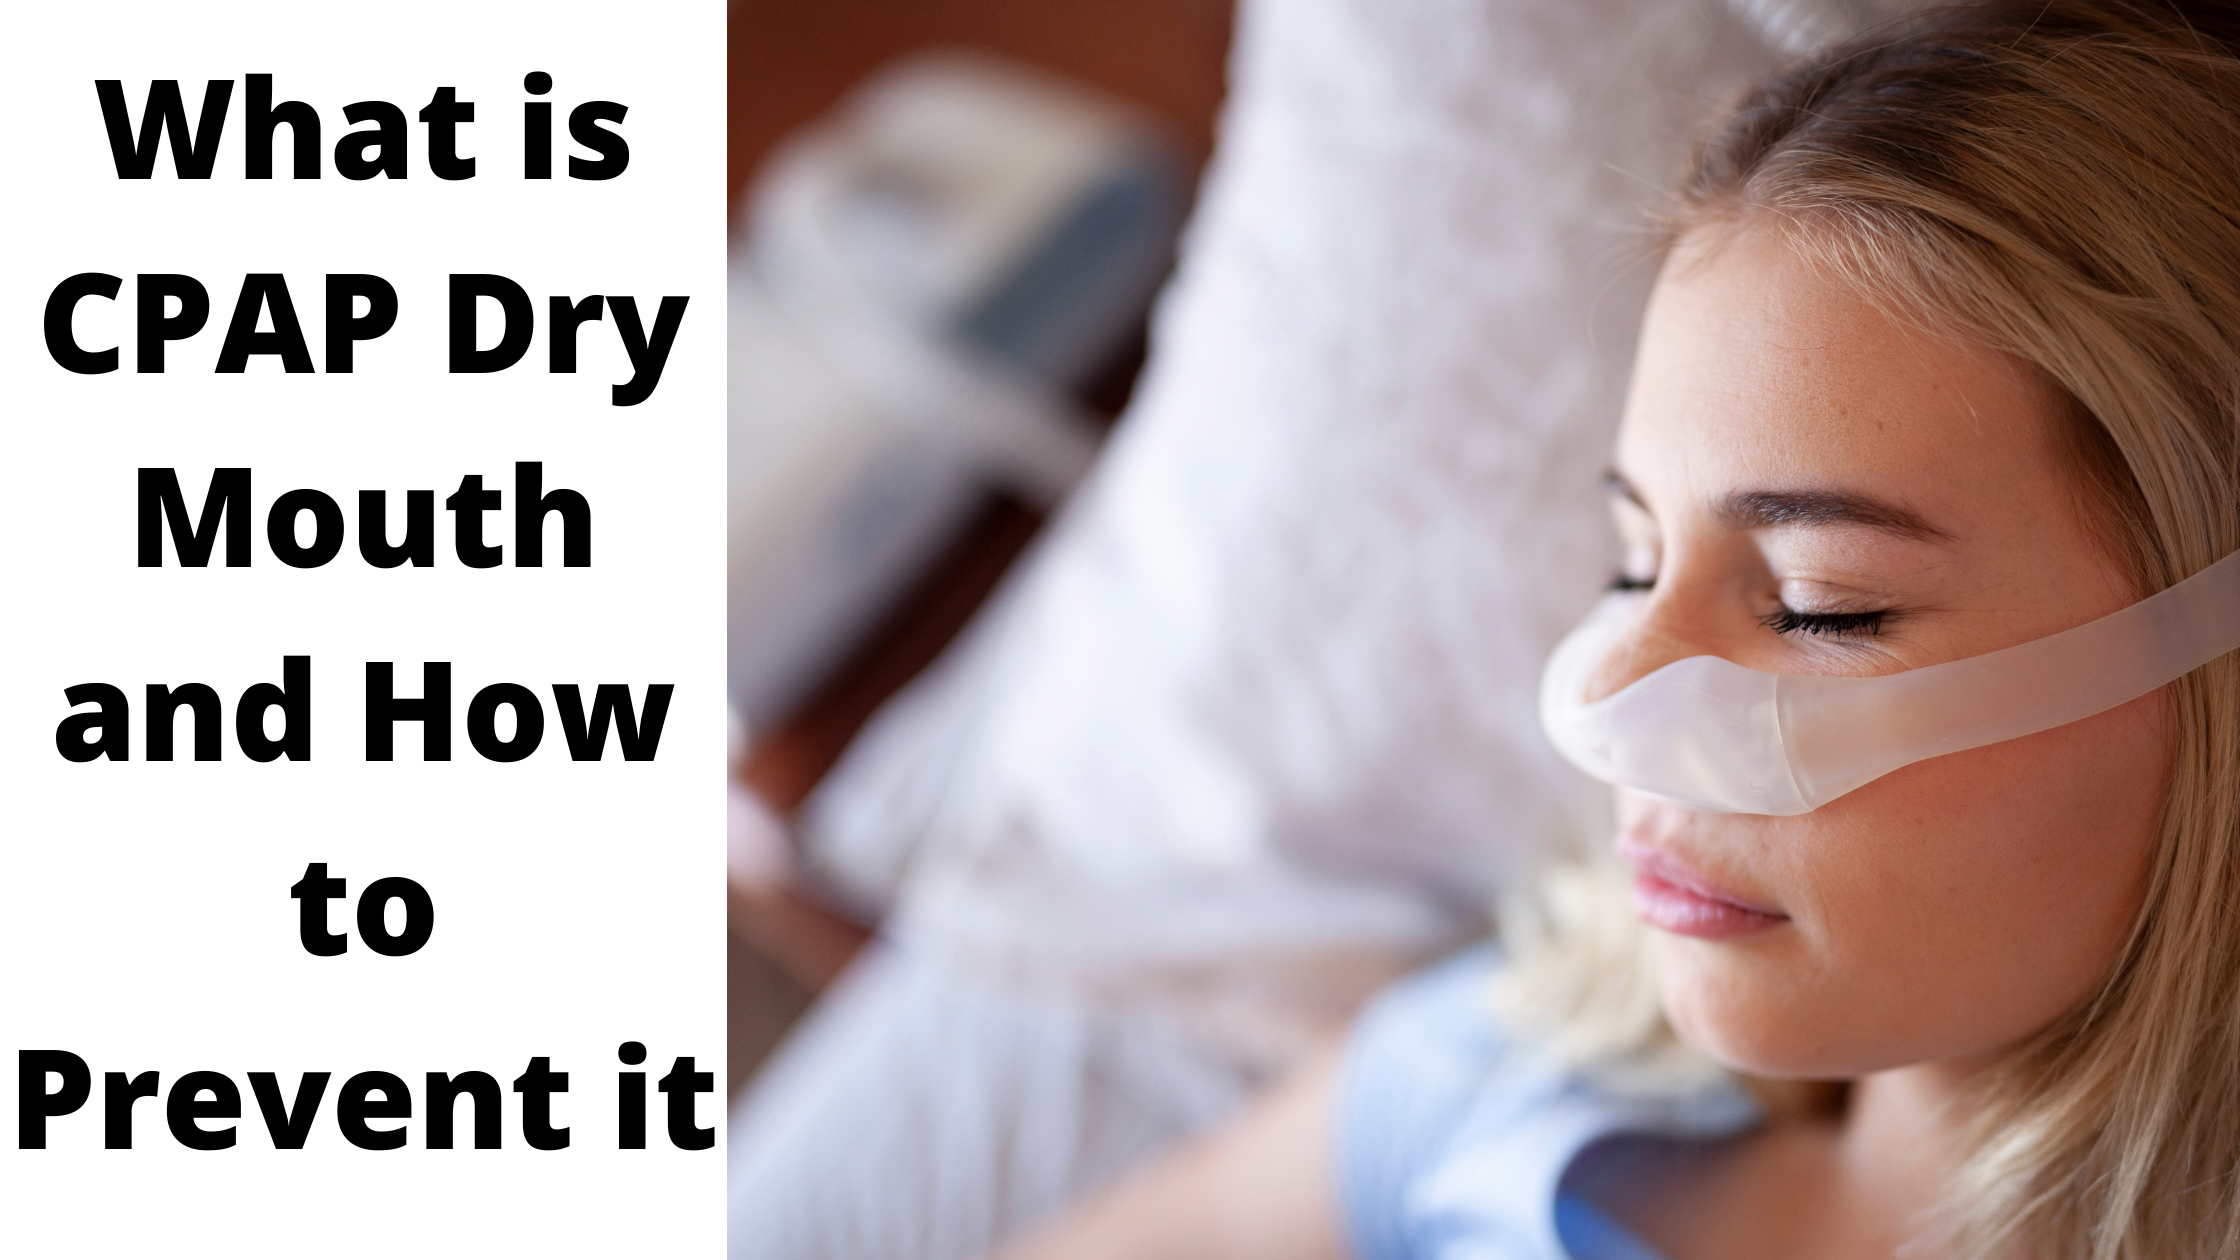 What is CPAP Dry Mouth and How to Prevent it